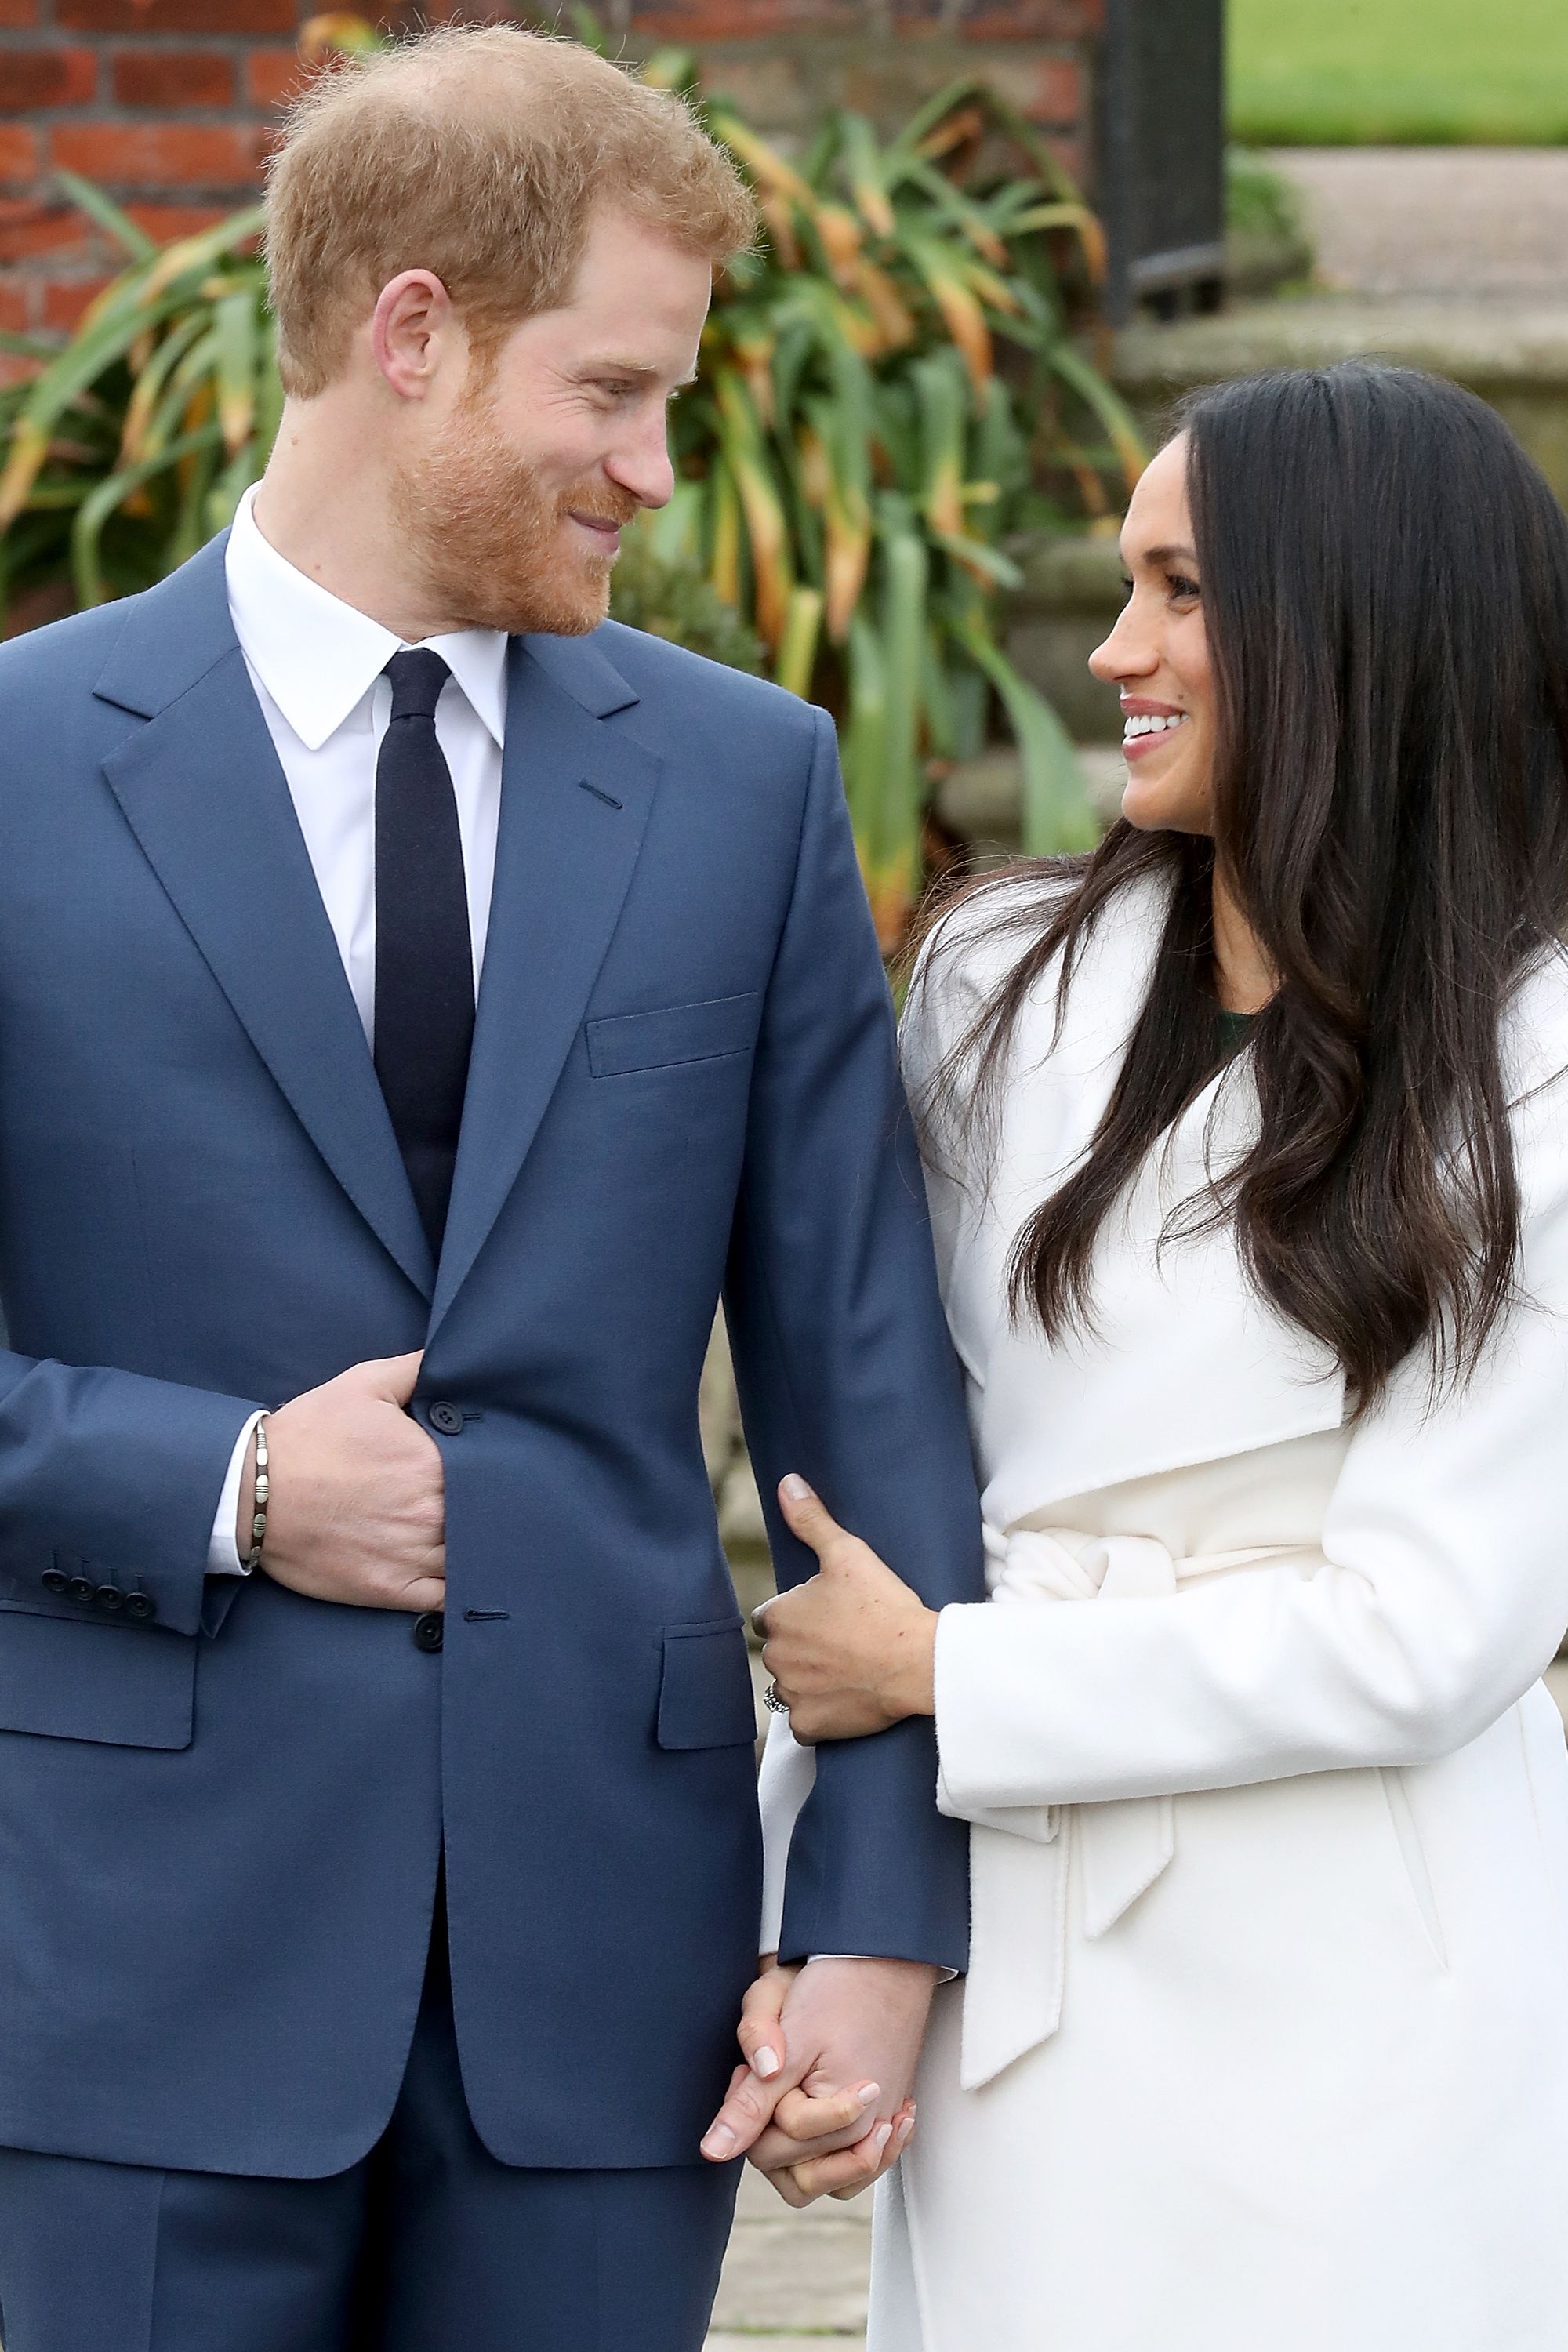 https://hips.hearstapps.com/hmg-prod.s3.amazonaws.com/images/hbz-prince-harry-meghan-markle-cute-moments-gettyimages-880160638-1523378904.jpg?crop=1xw:1xh;center,top